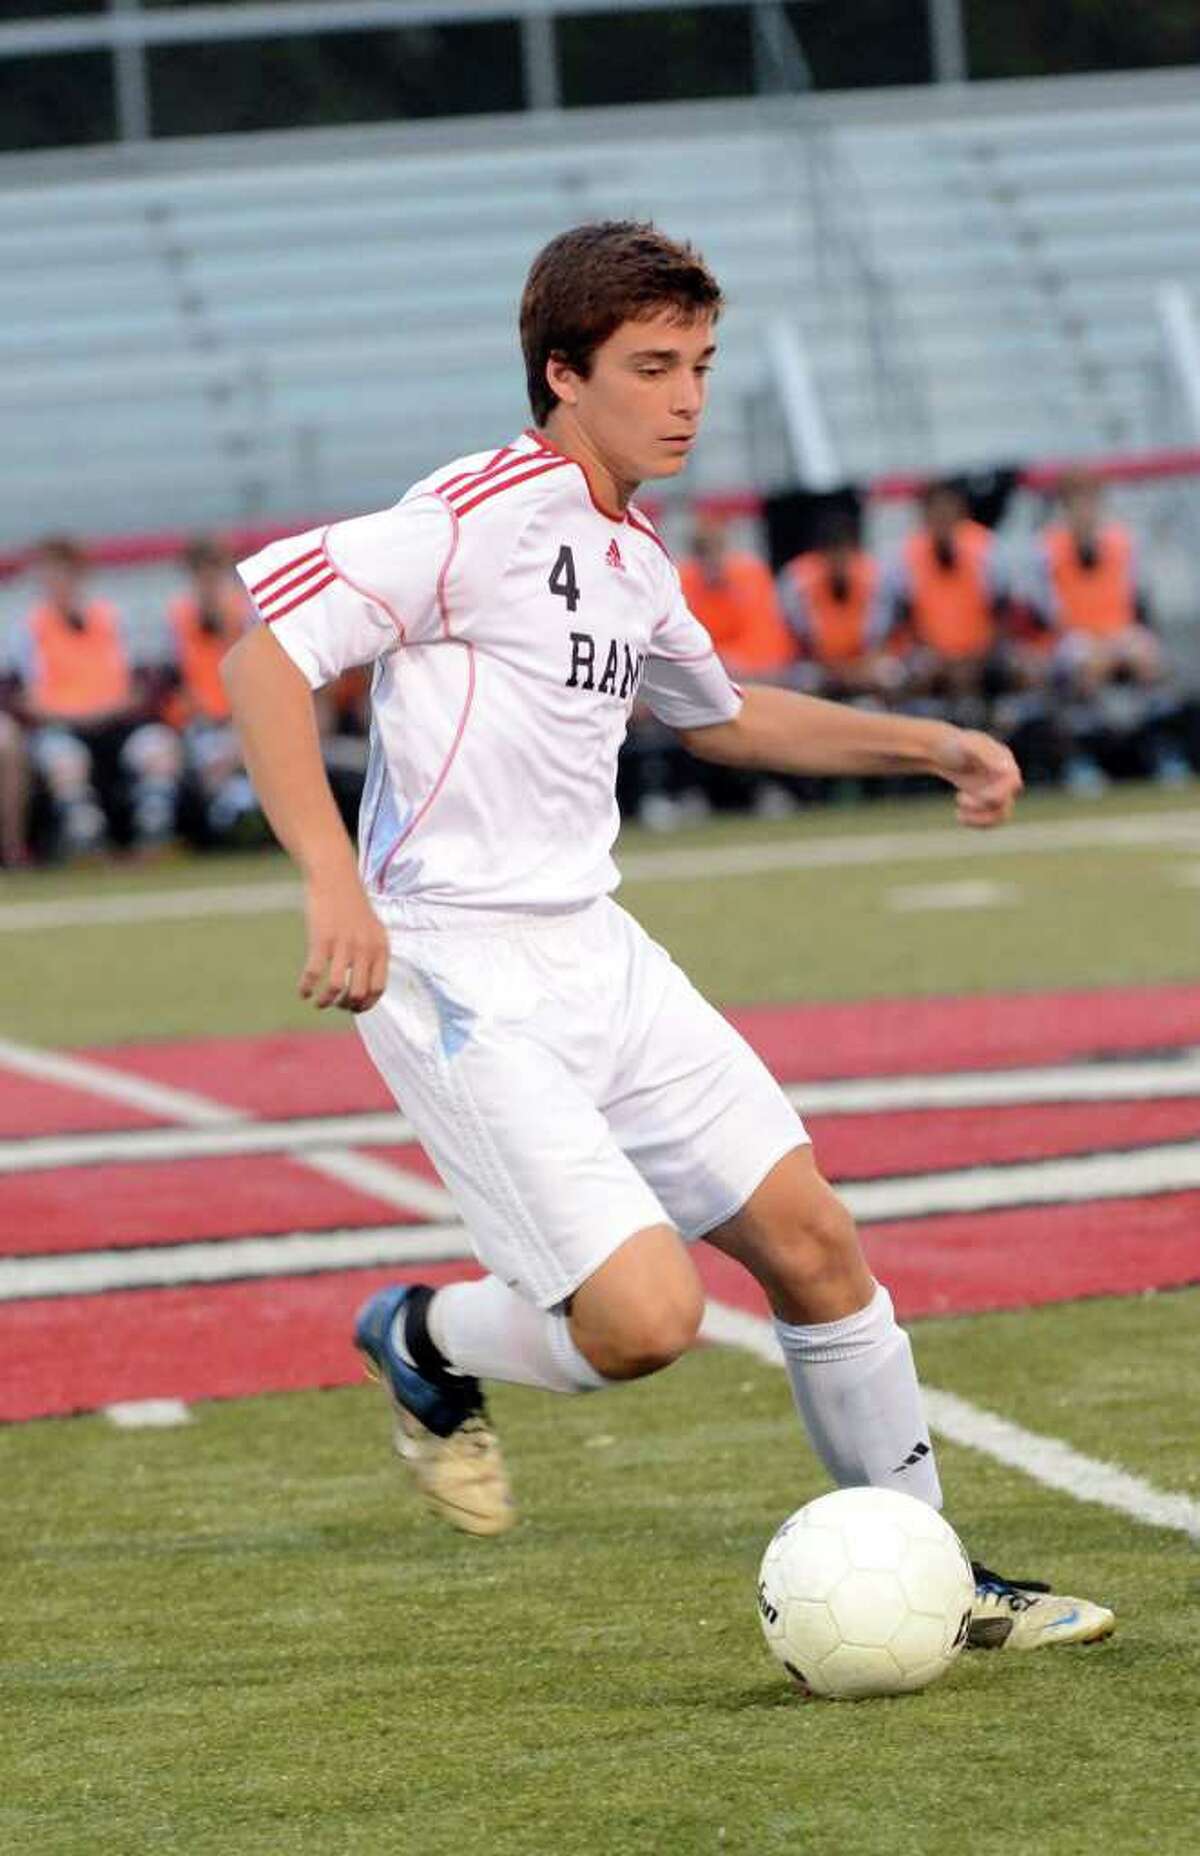 New Canaan's Robert Valente controls the ball during the boys soccer game against Fairfield Warde at New Canaan High School on Tuesday, Sept. 27, 2011.